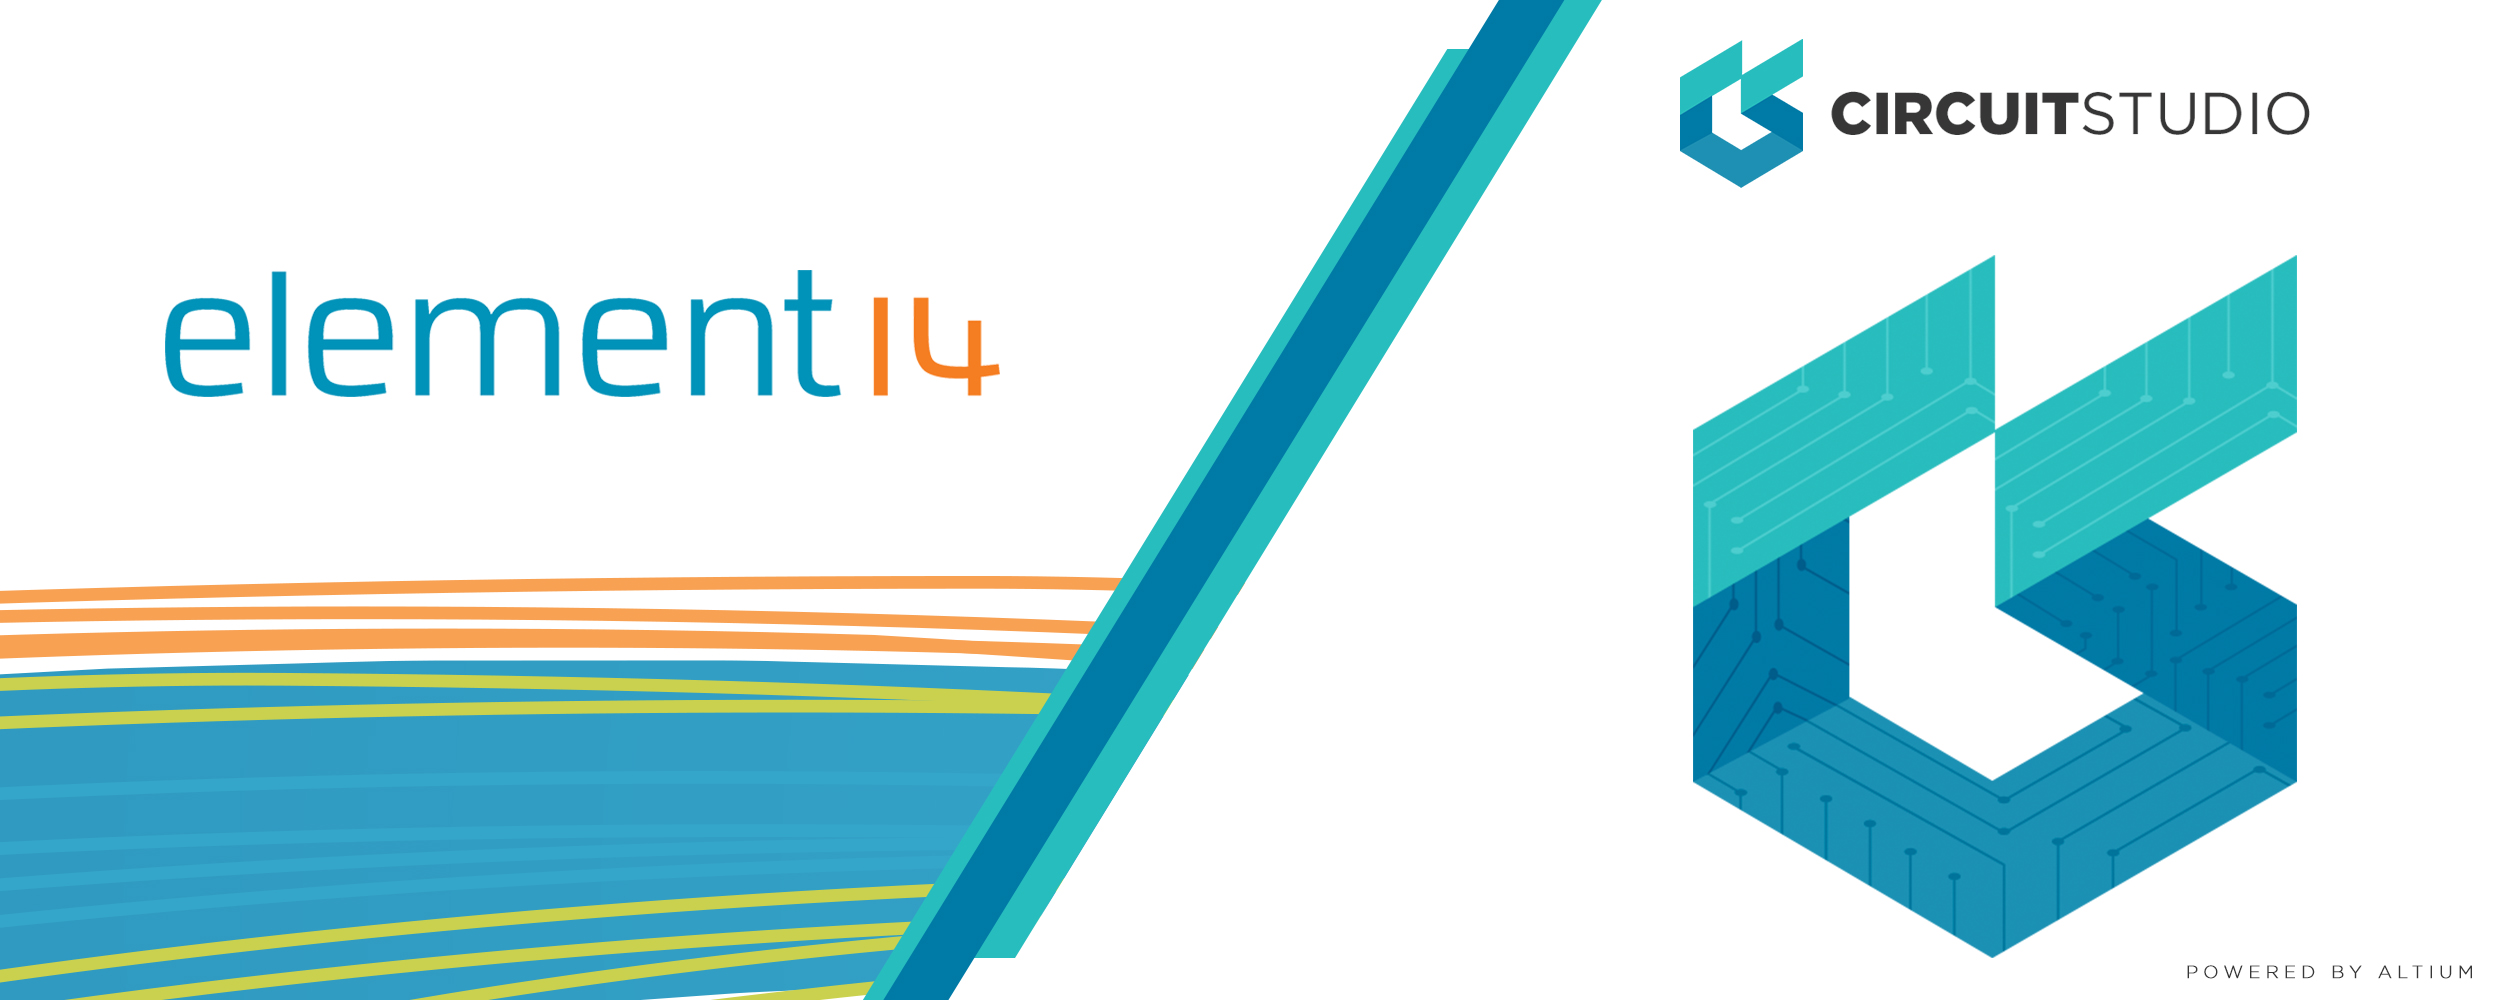 Downloadable Image for Altium and element14 announce partnership